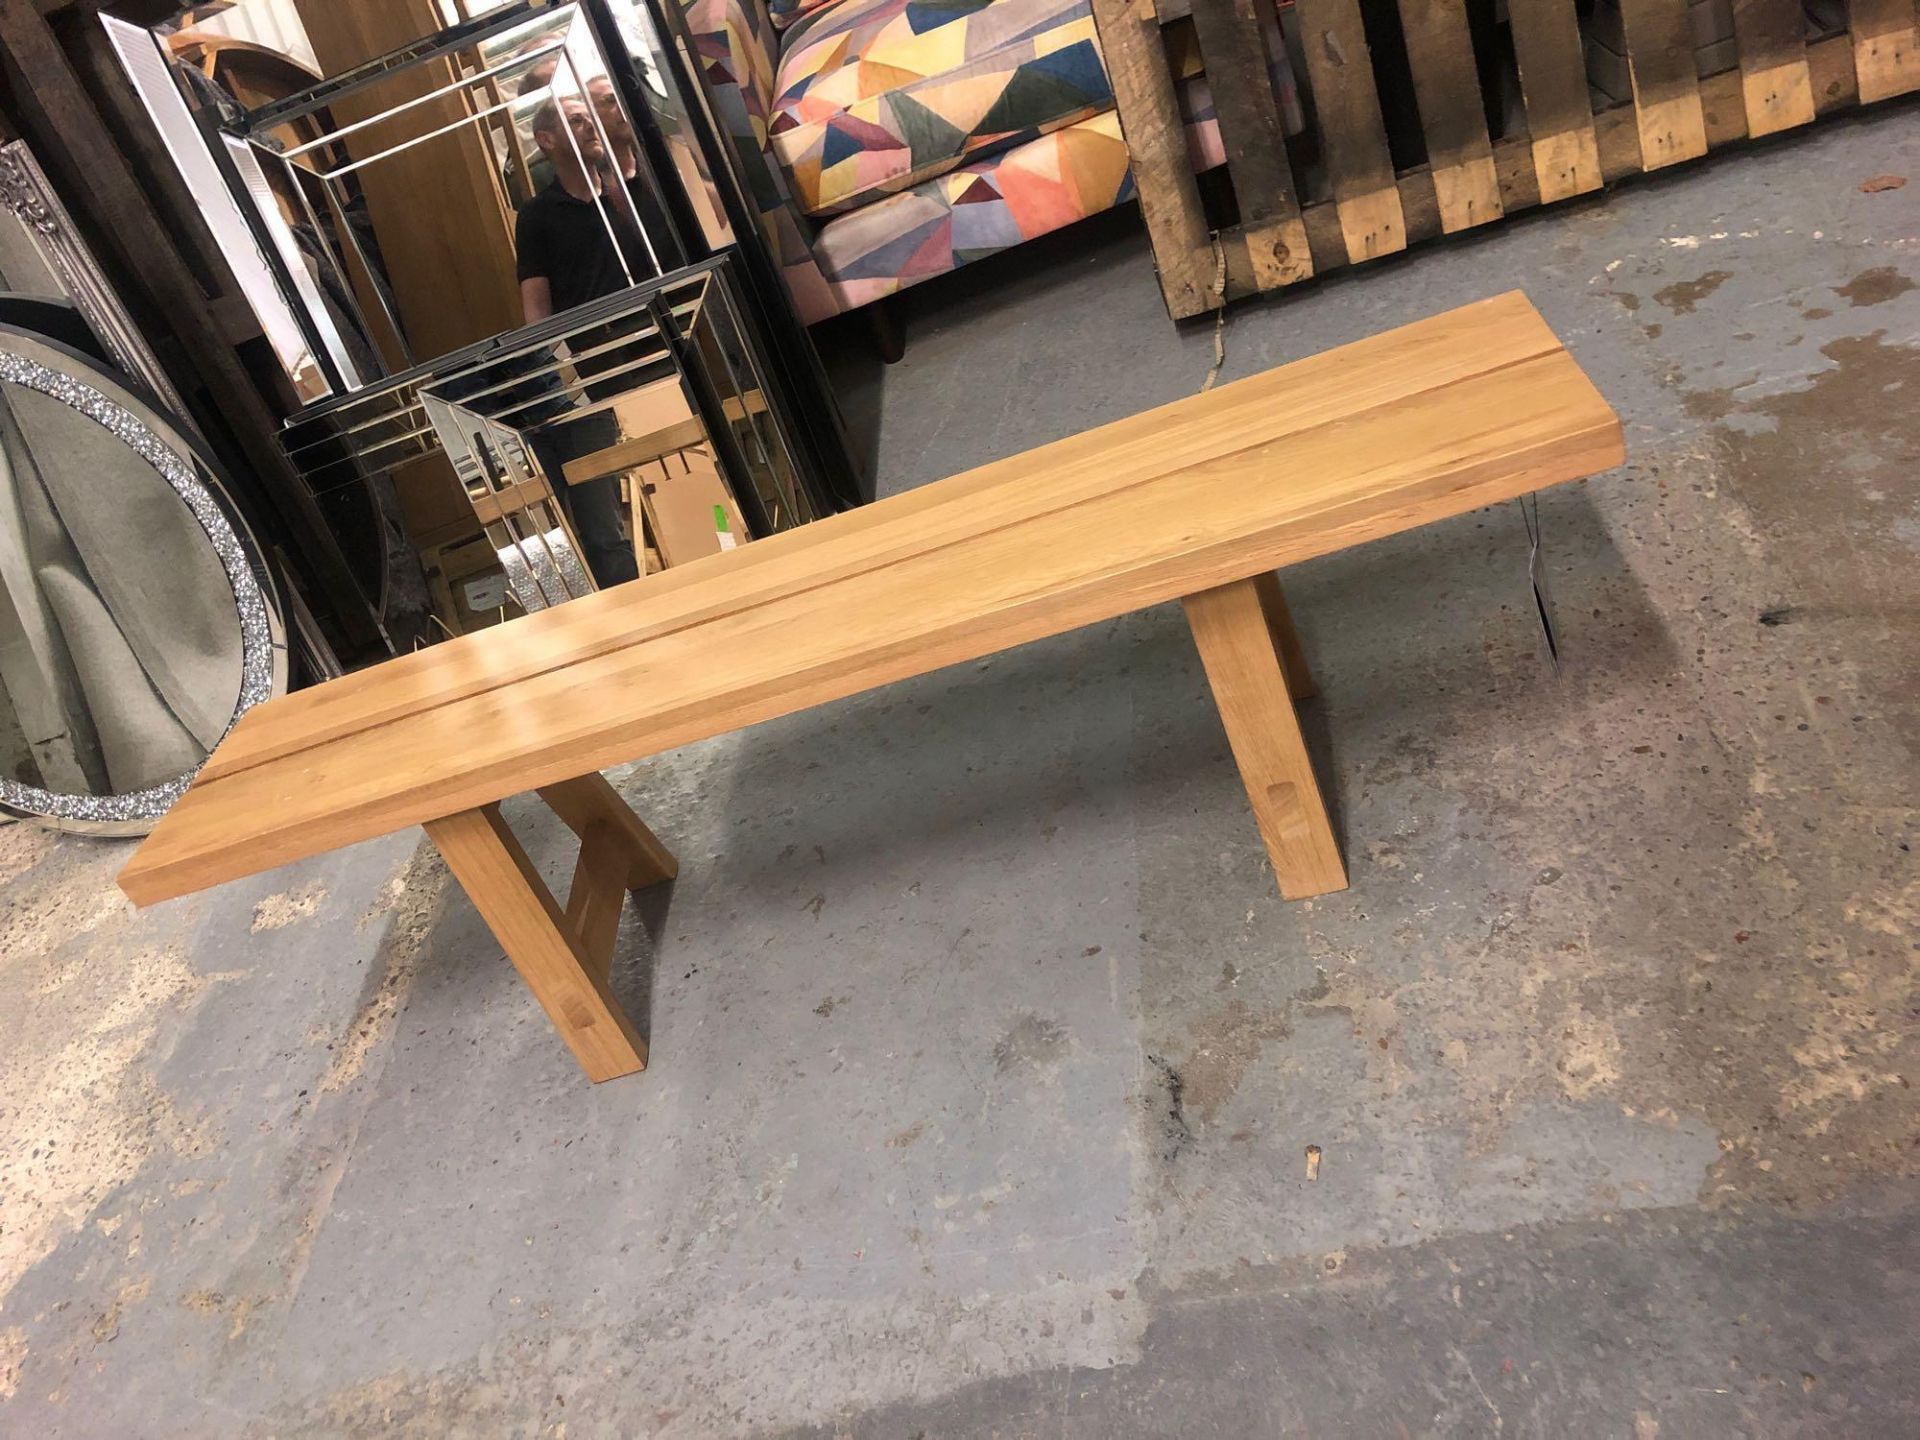 Kielder Bench 1600 x 350 x 450mm An Oak Dining Bench Which Can Be Used Along With Many Different - Image 2 of 2